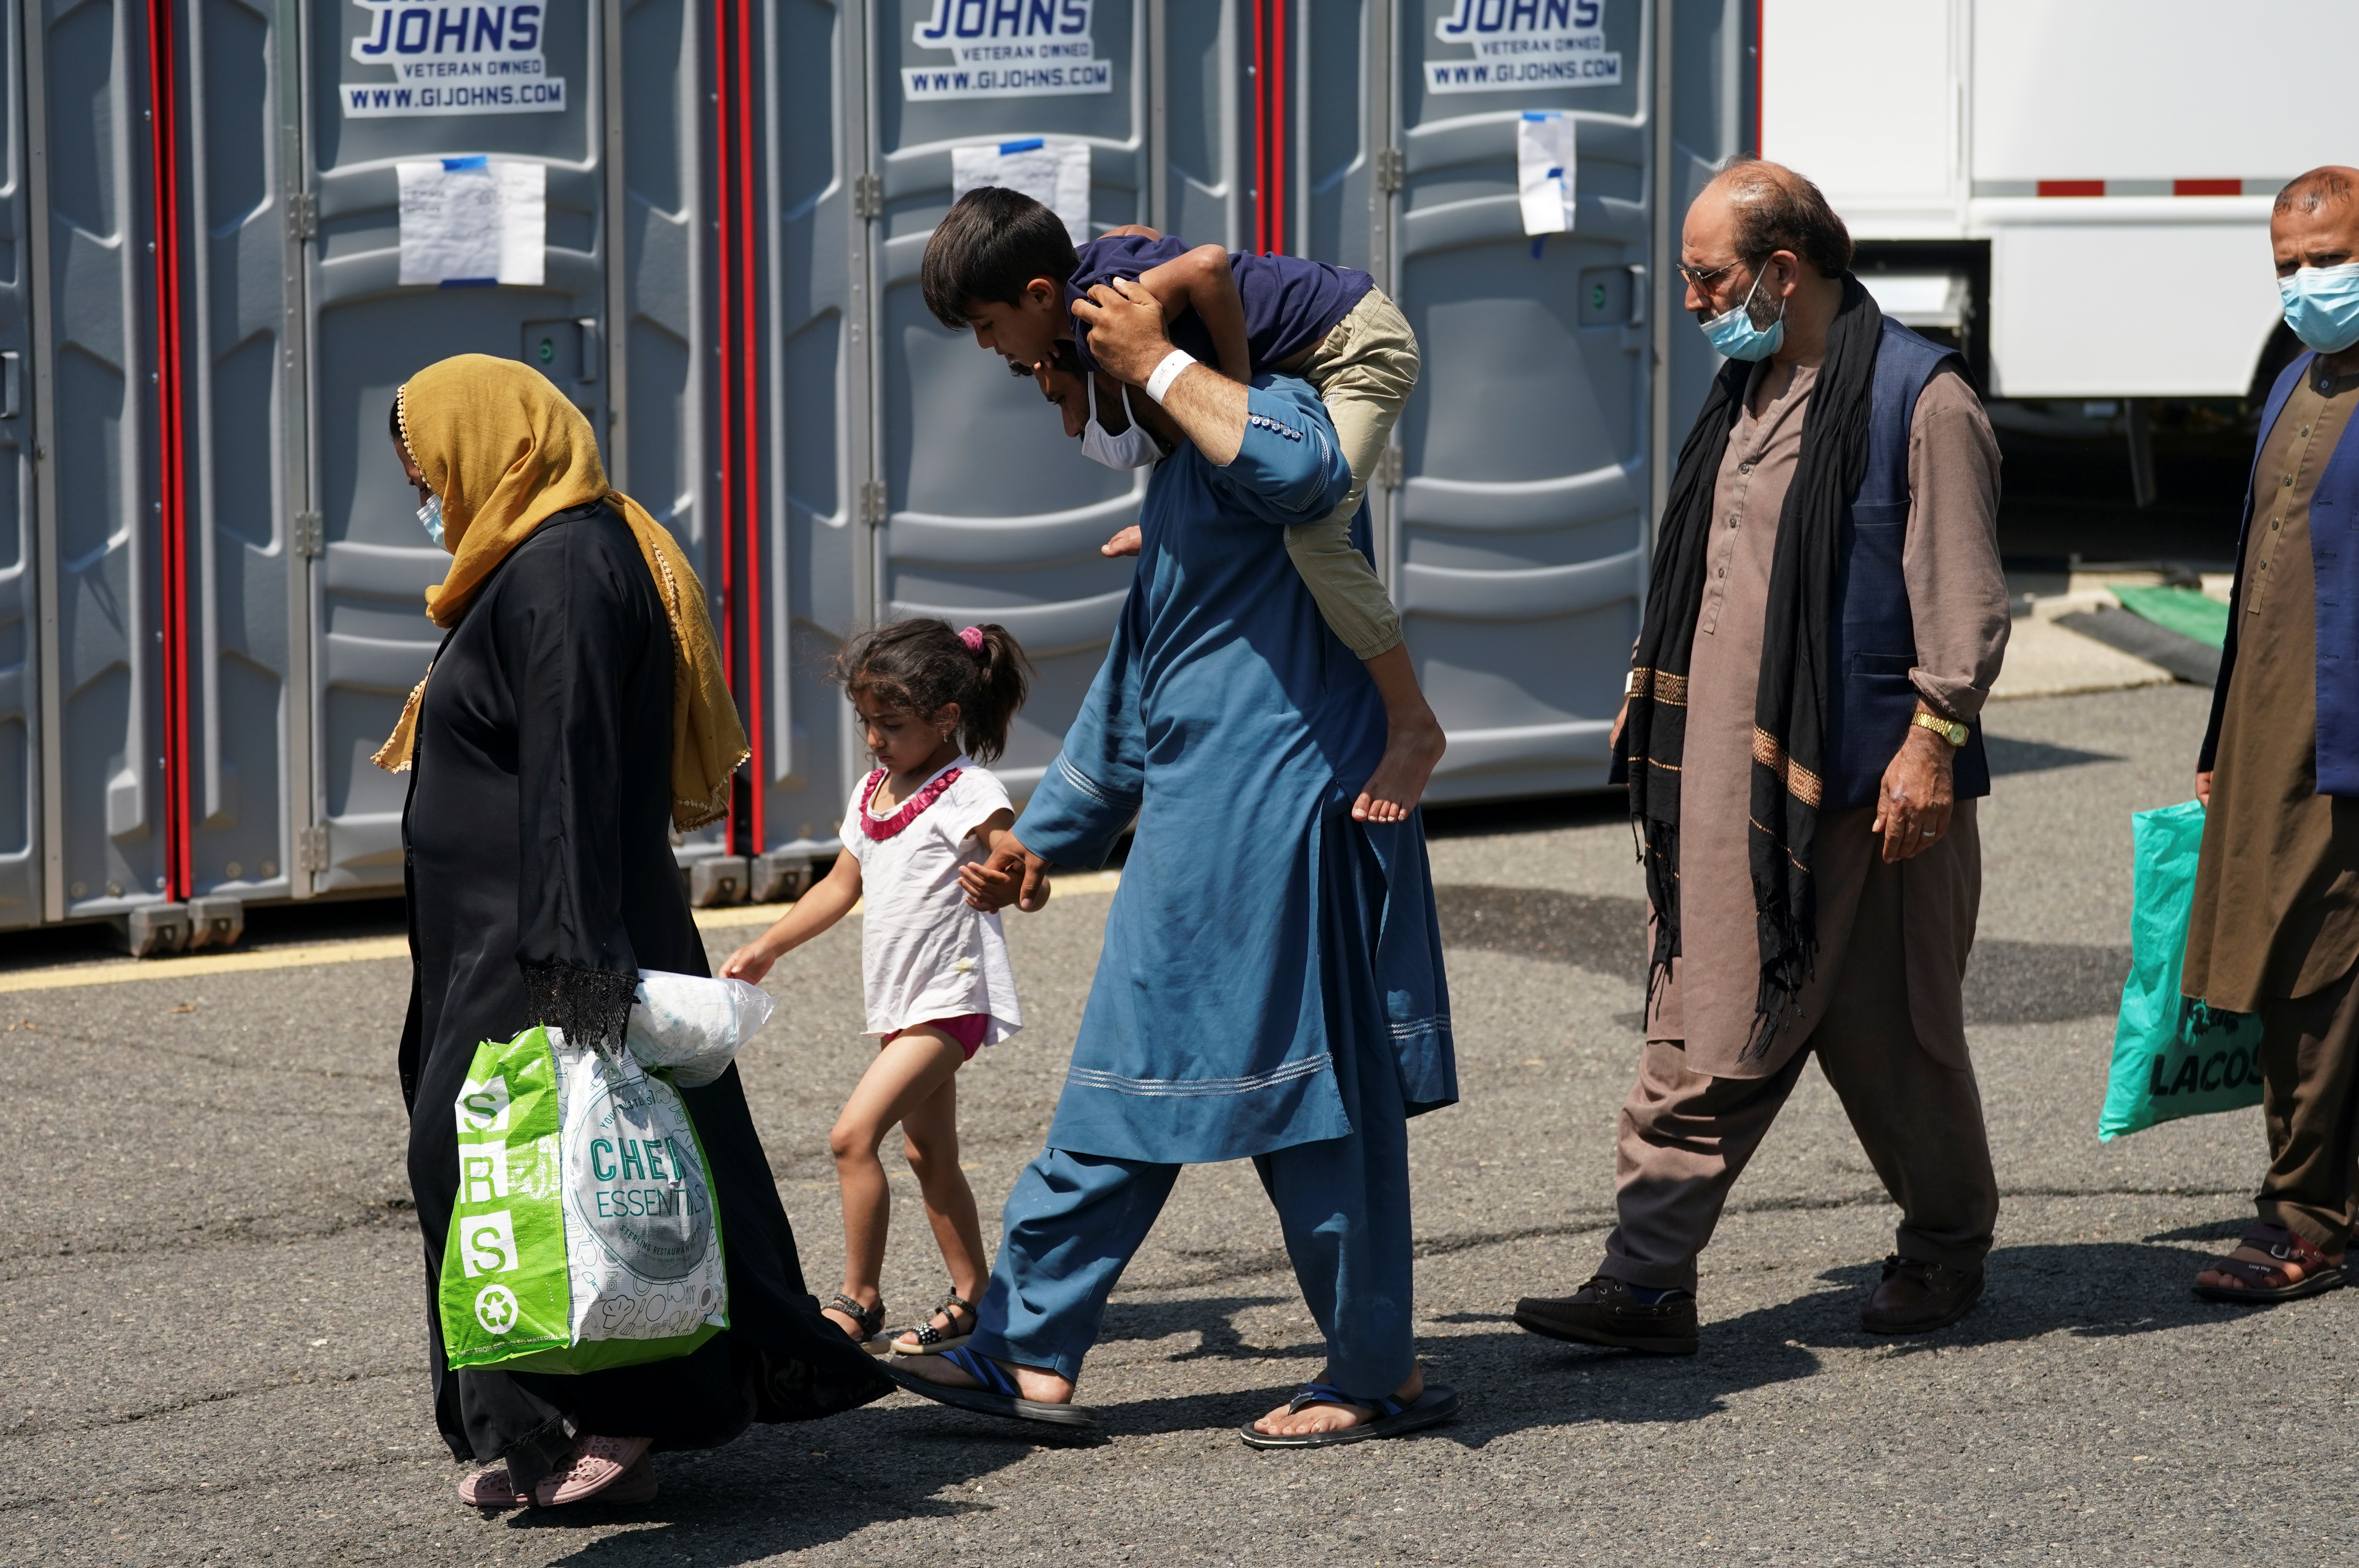 Afghan refugees at a processing center in Chantilly, Virginia